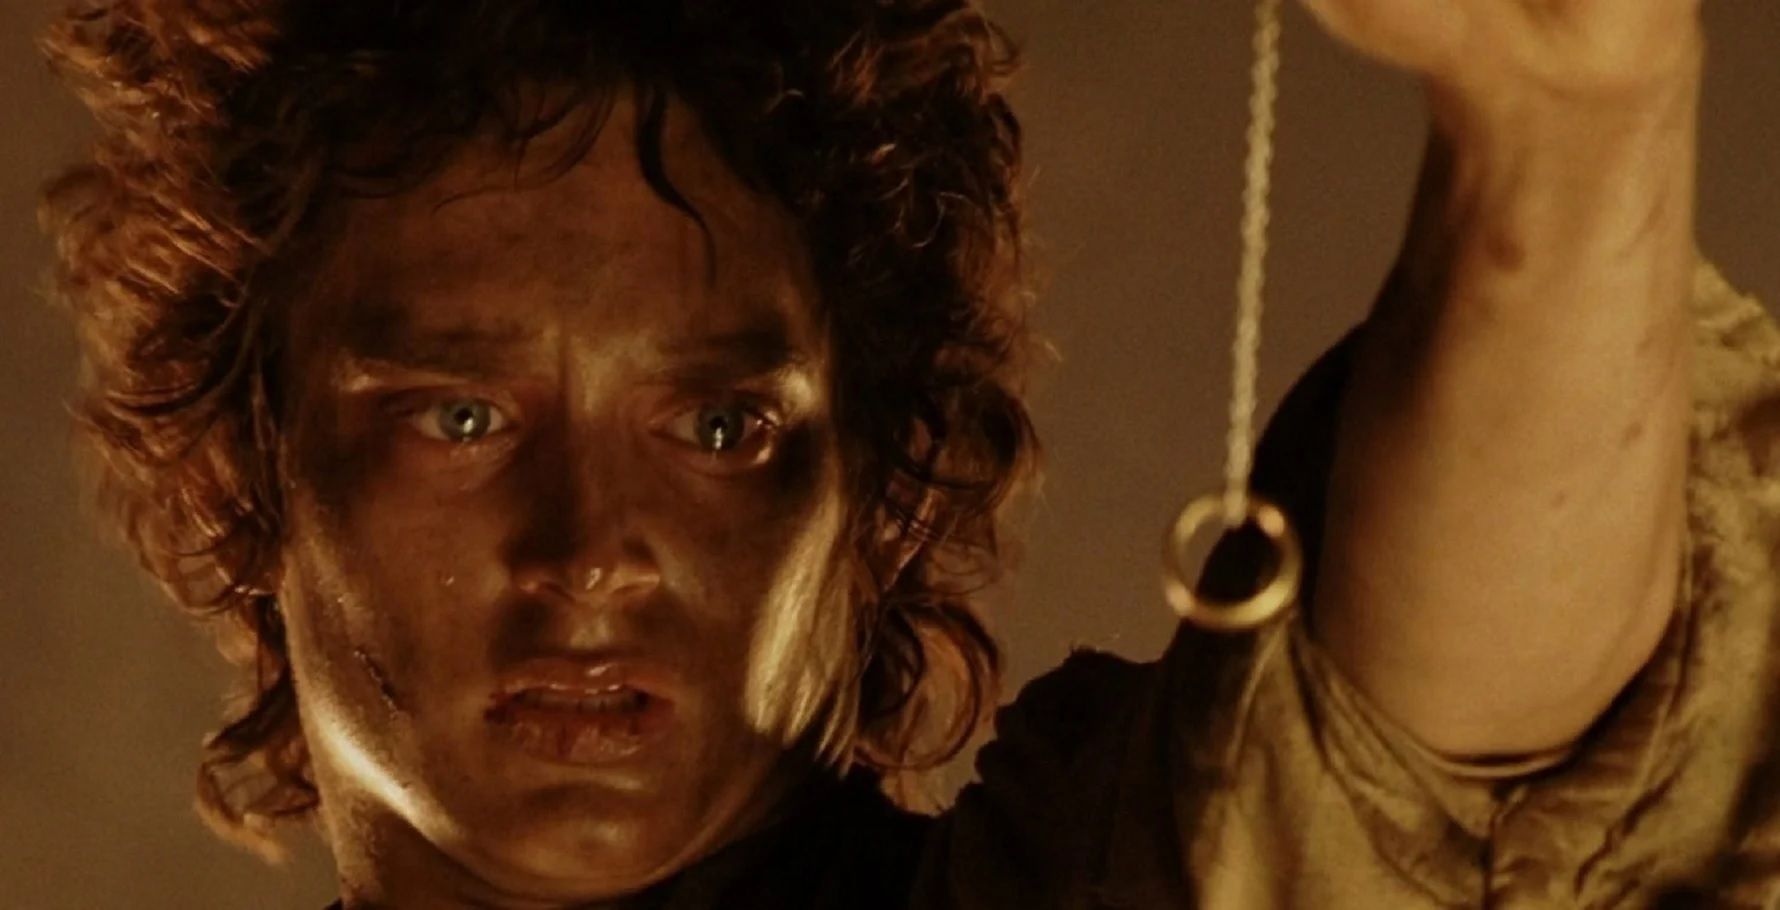 Elijah Wood as Frodo Baggins holding the One Ring